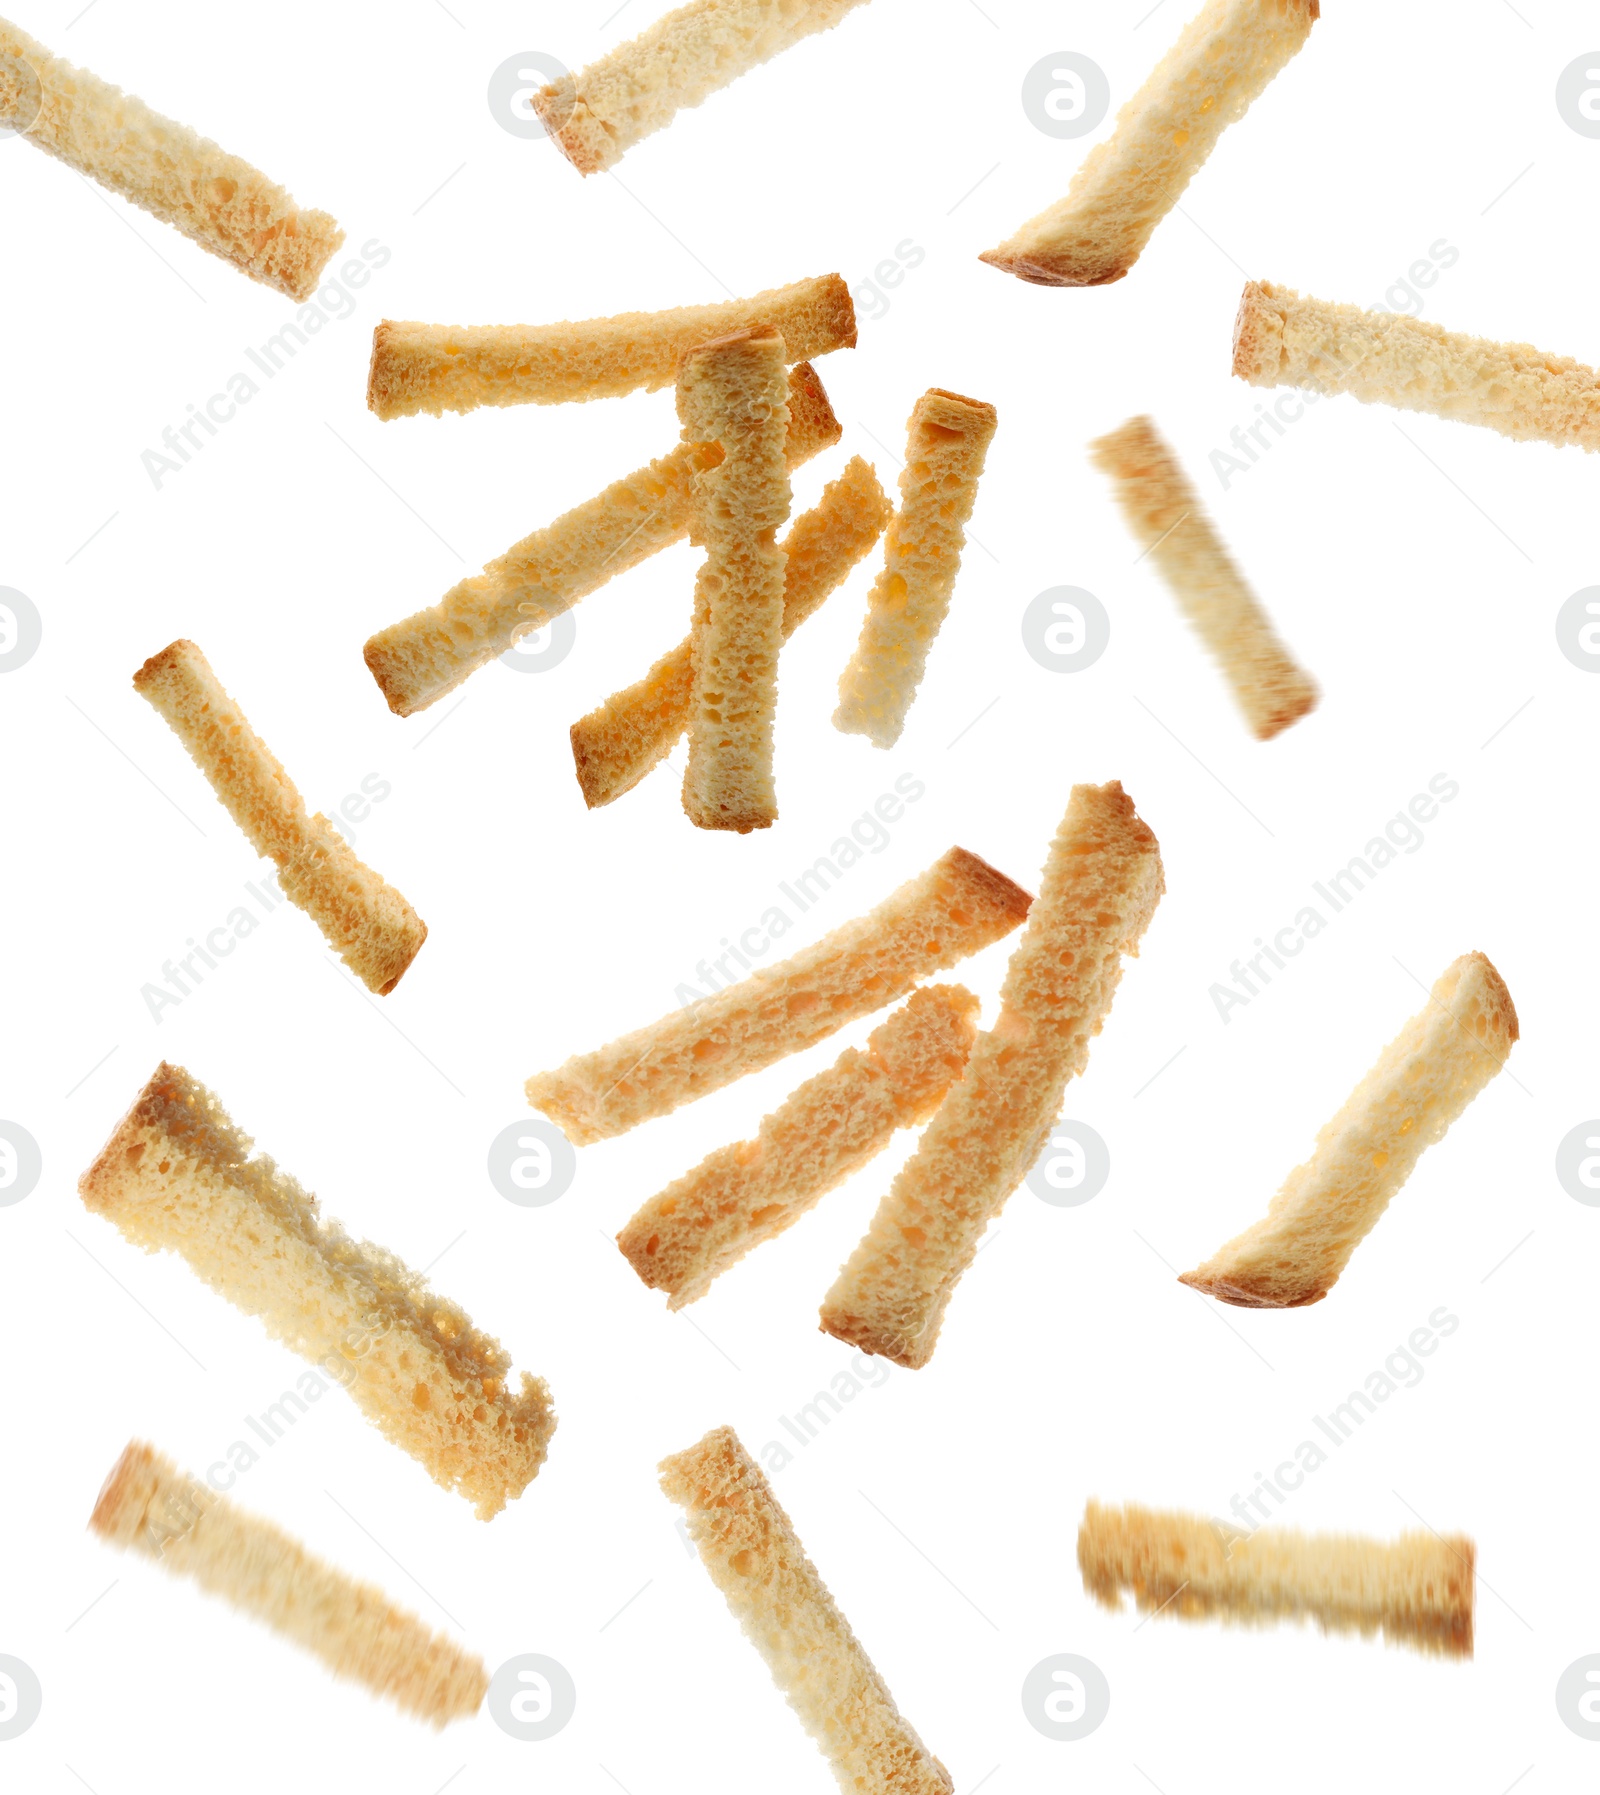 Image of Delicious crispy rusks falling on white background